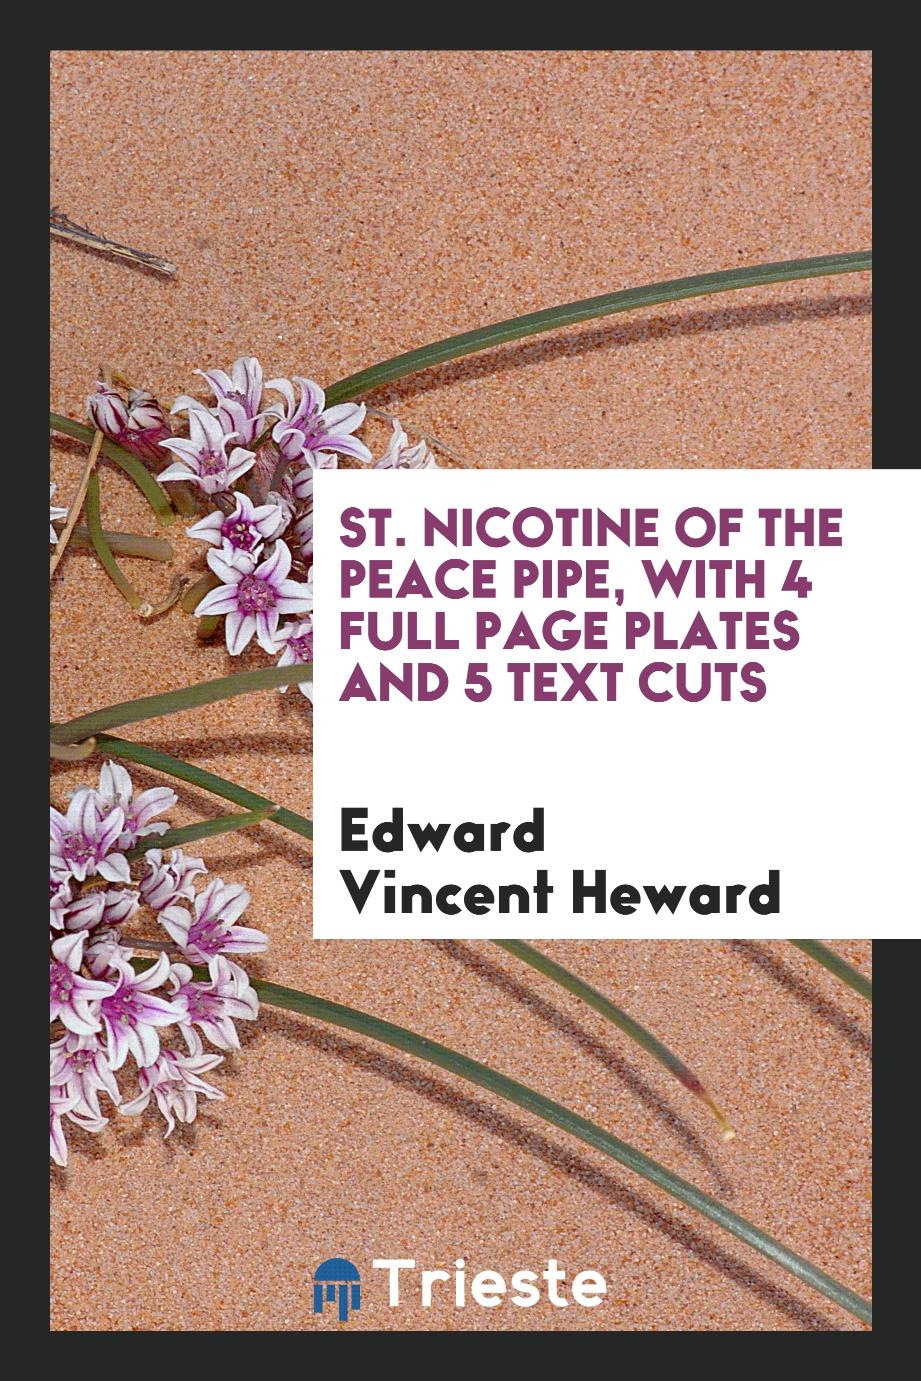 St. Nicotine of the peace pipe, with 4 full page plates and 5 text cuts